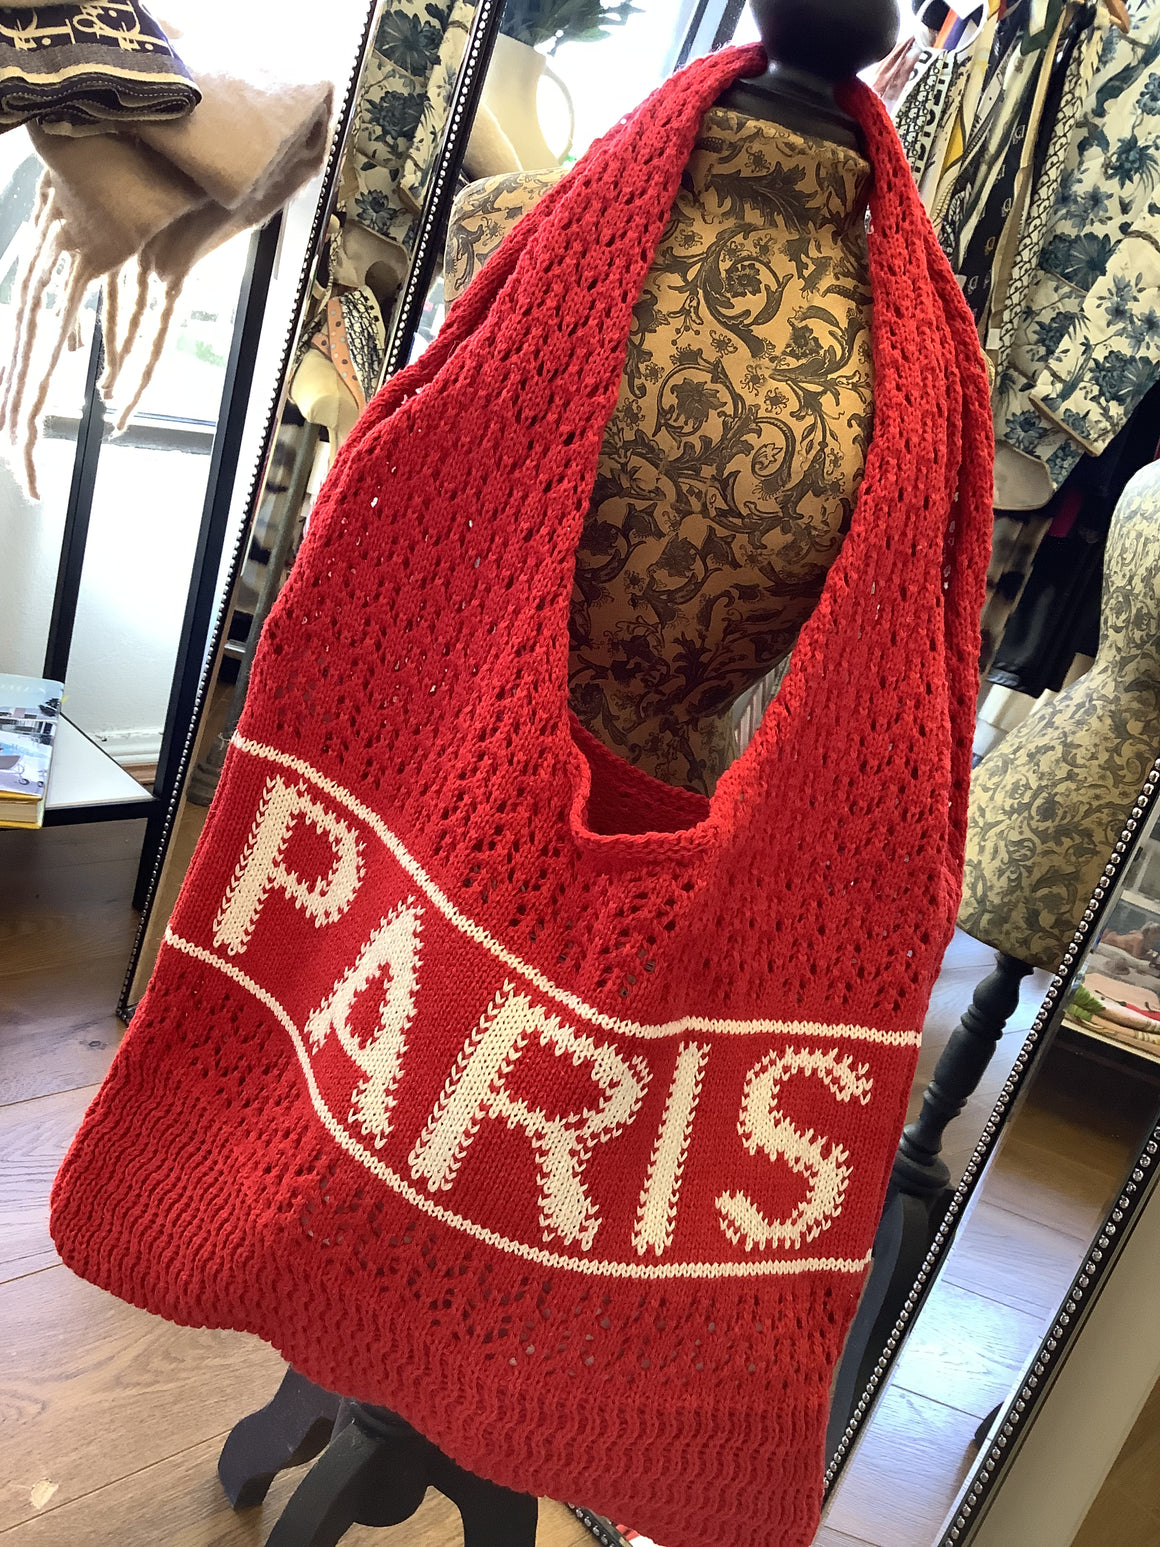 Woven Fabric Carry Bag - Paris/Red